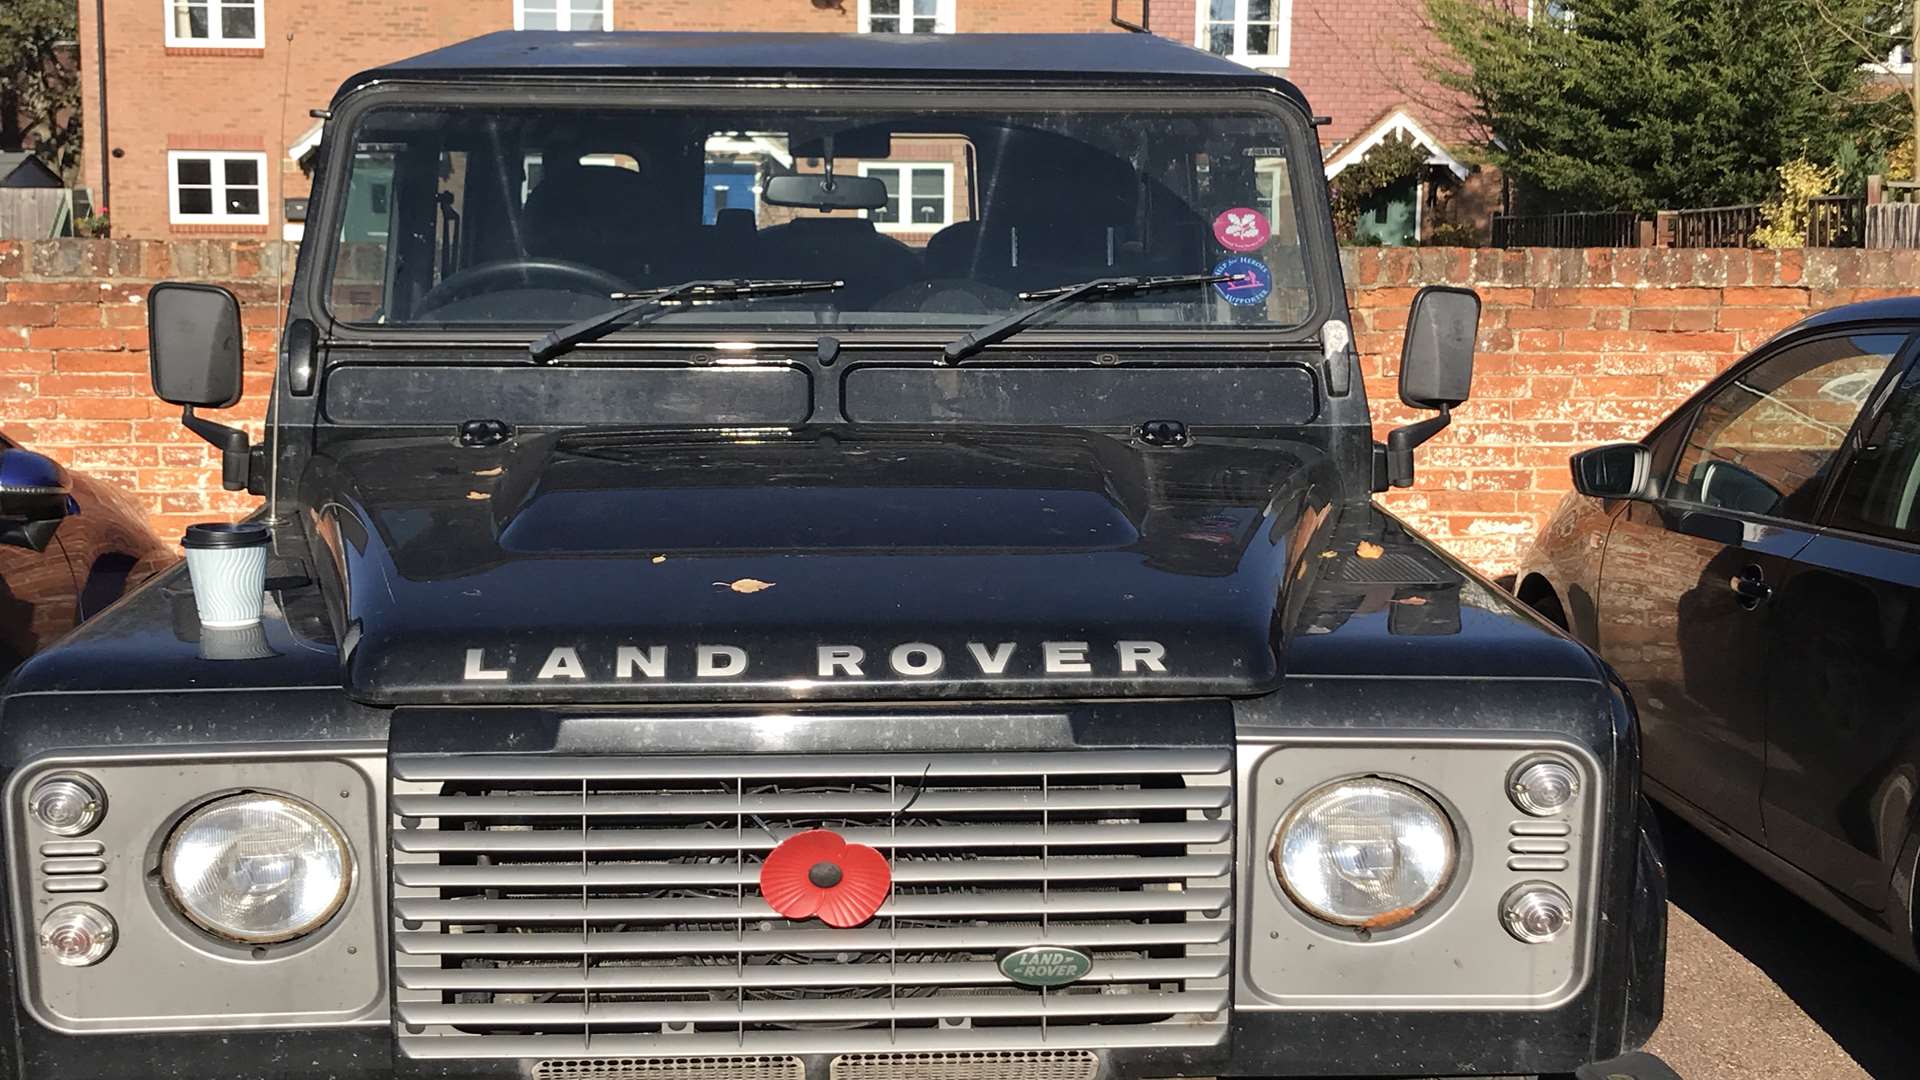 The black Land Rover Defender was nowhere to be found.